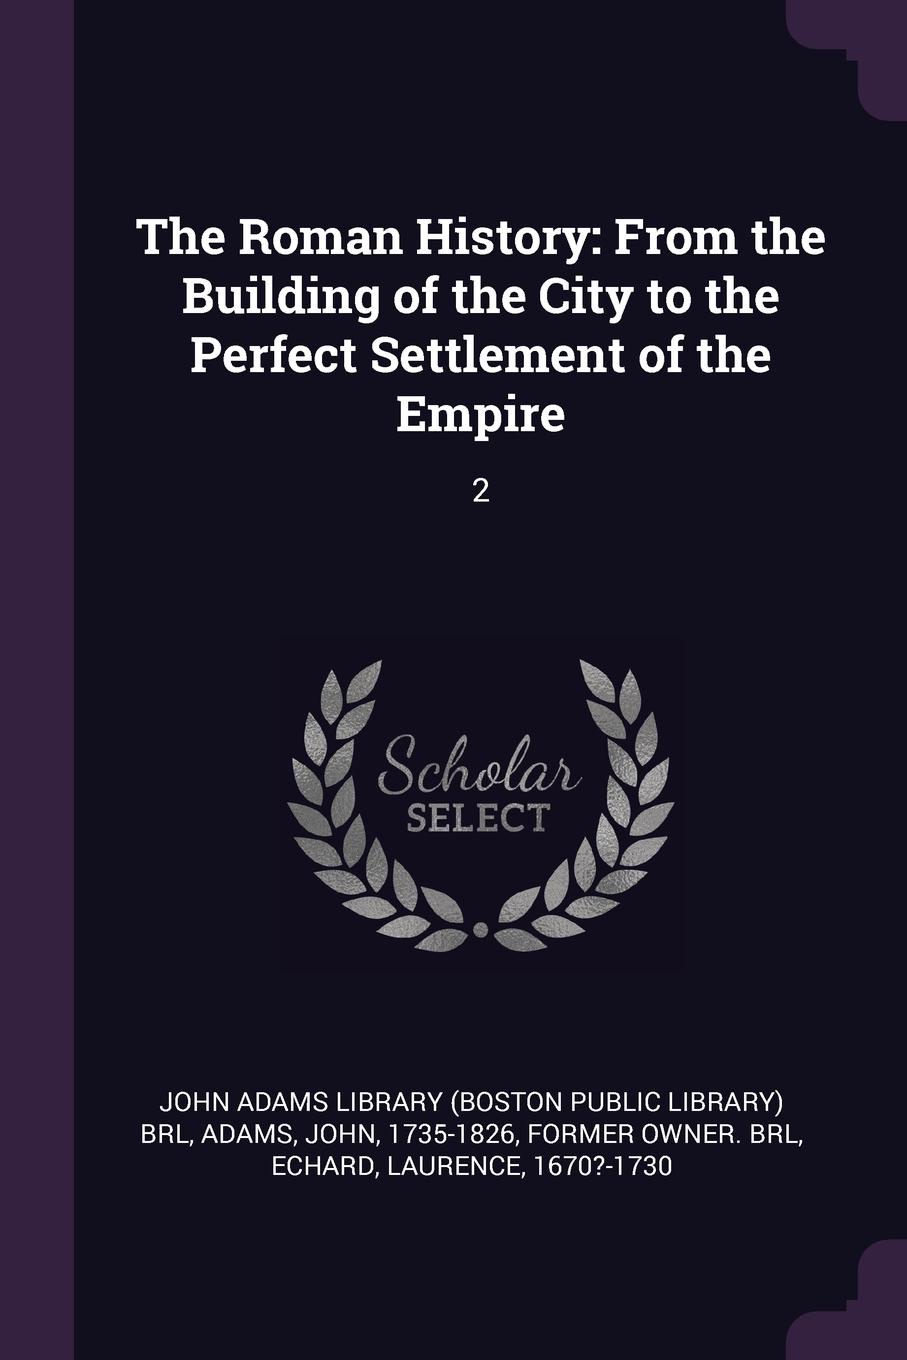 The Roman History. From the Building of the City to the Perfect Settlement of the Empire: 2